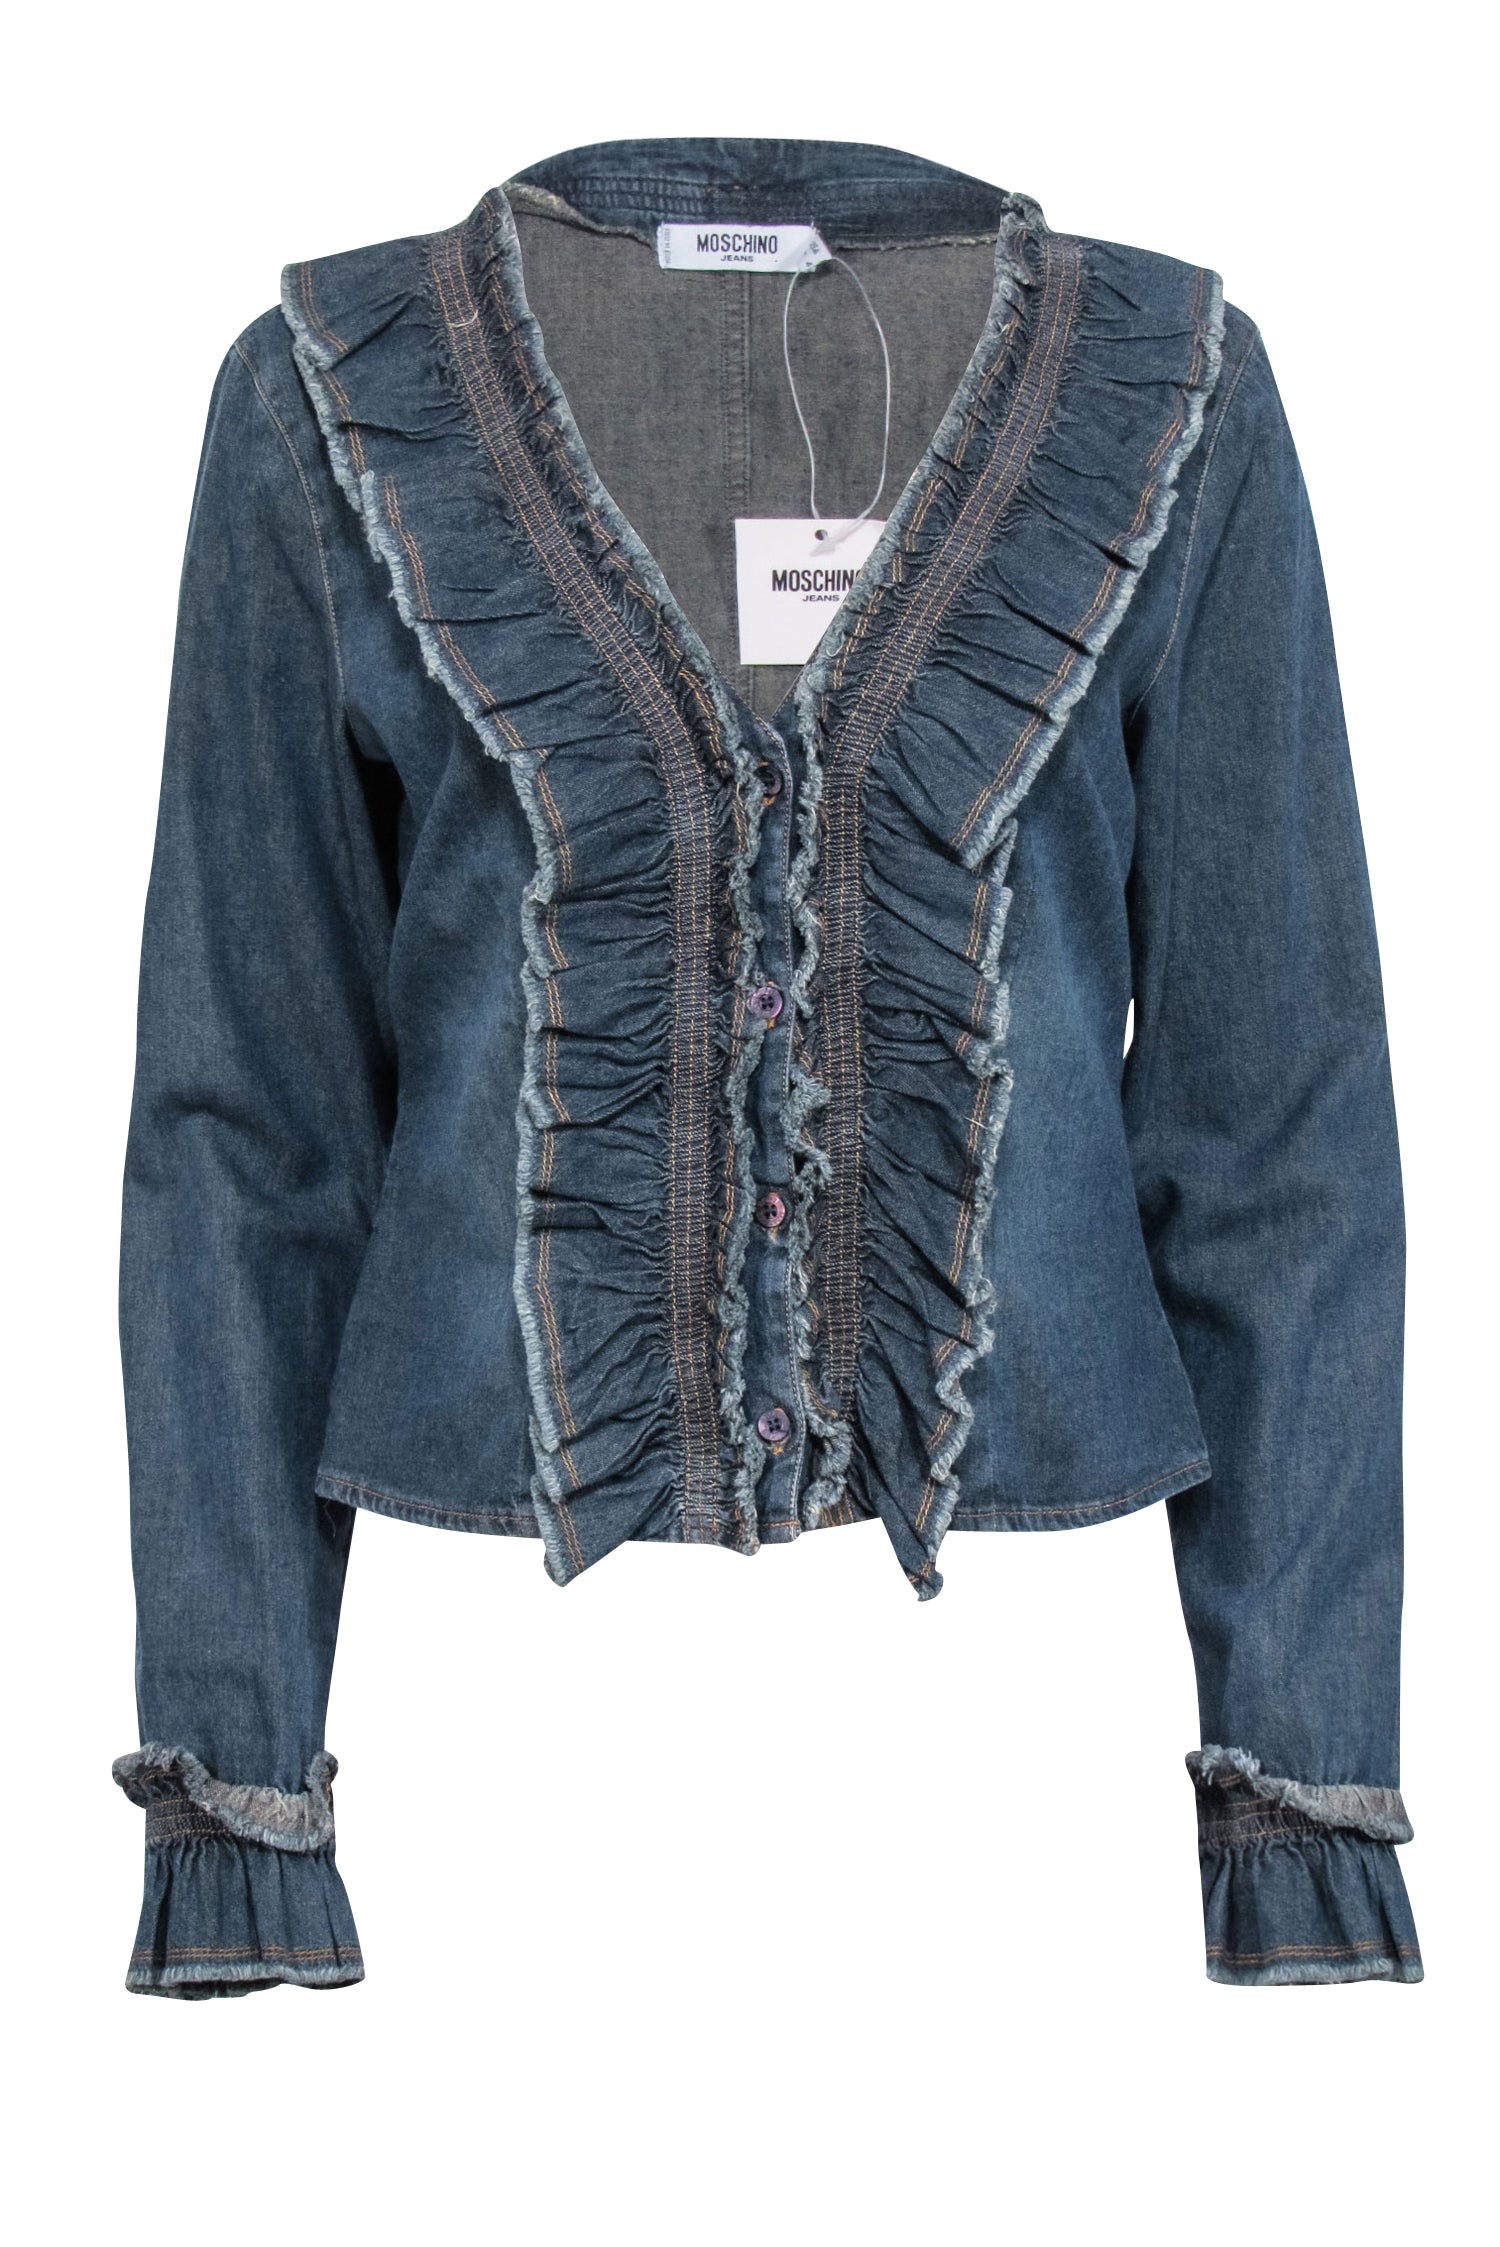 Moschino Jeans - Chambray Ruffled Button Up Blouse Sz 12